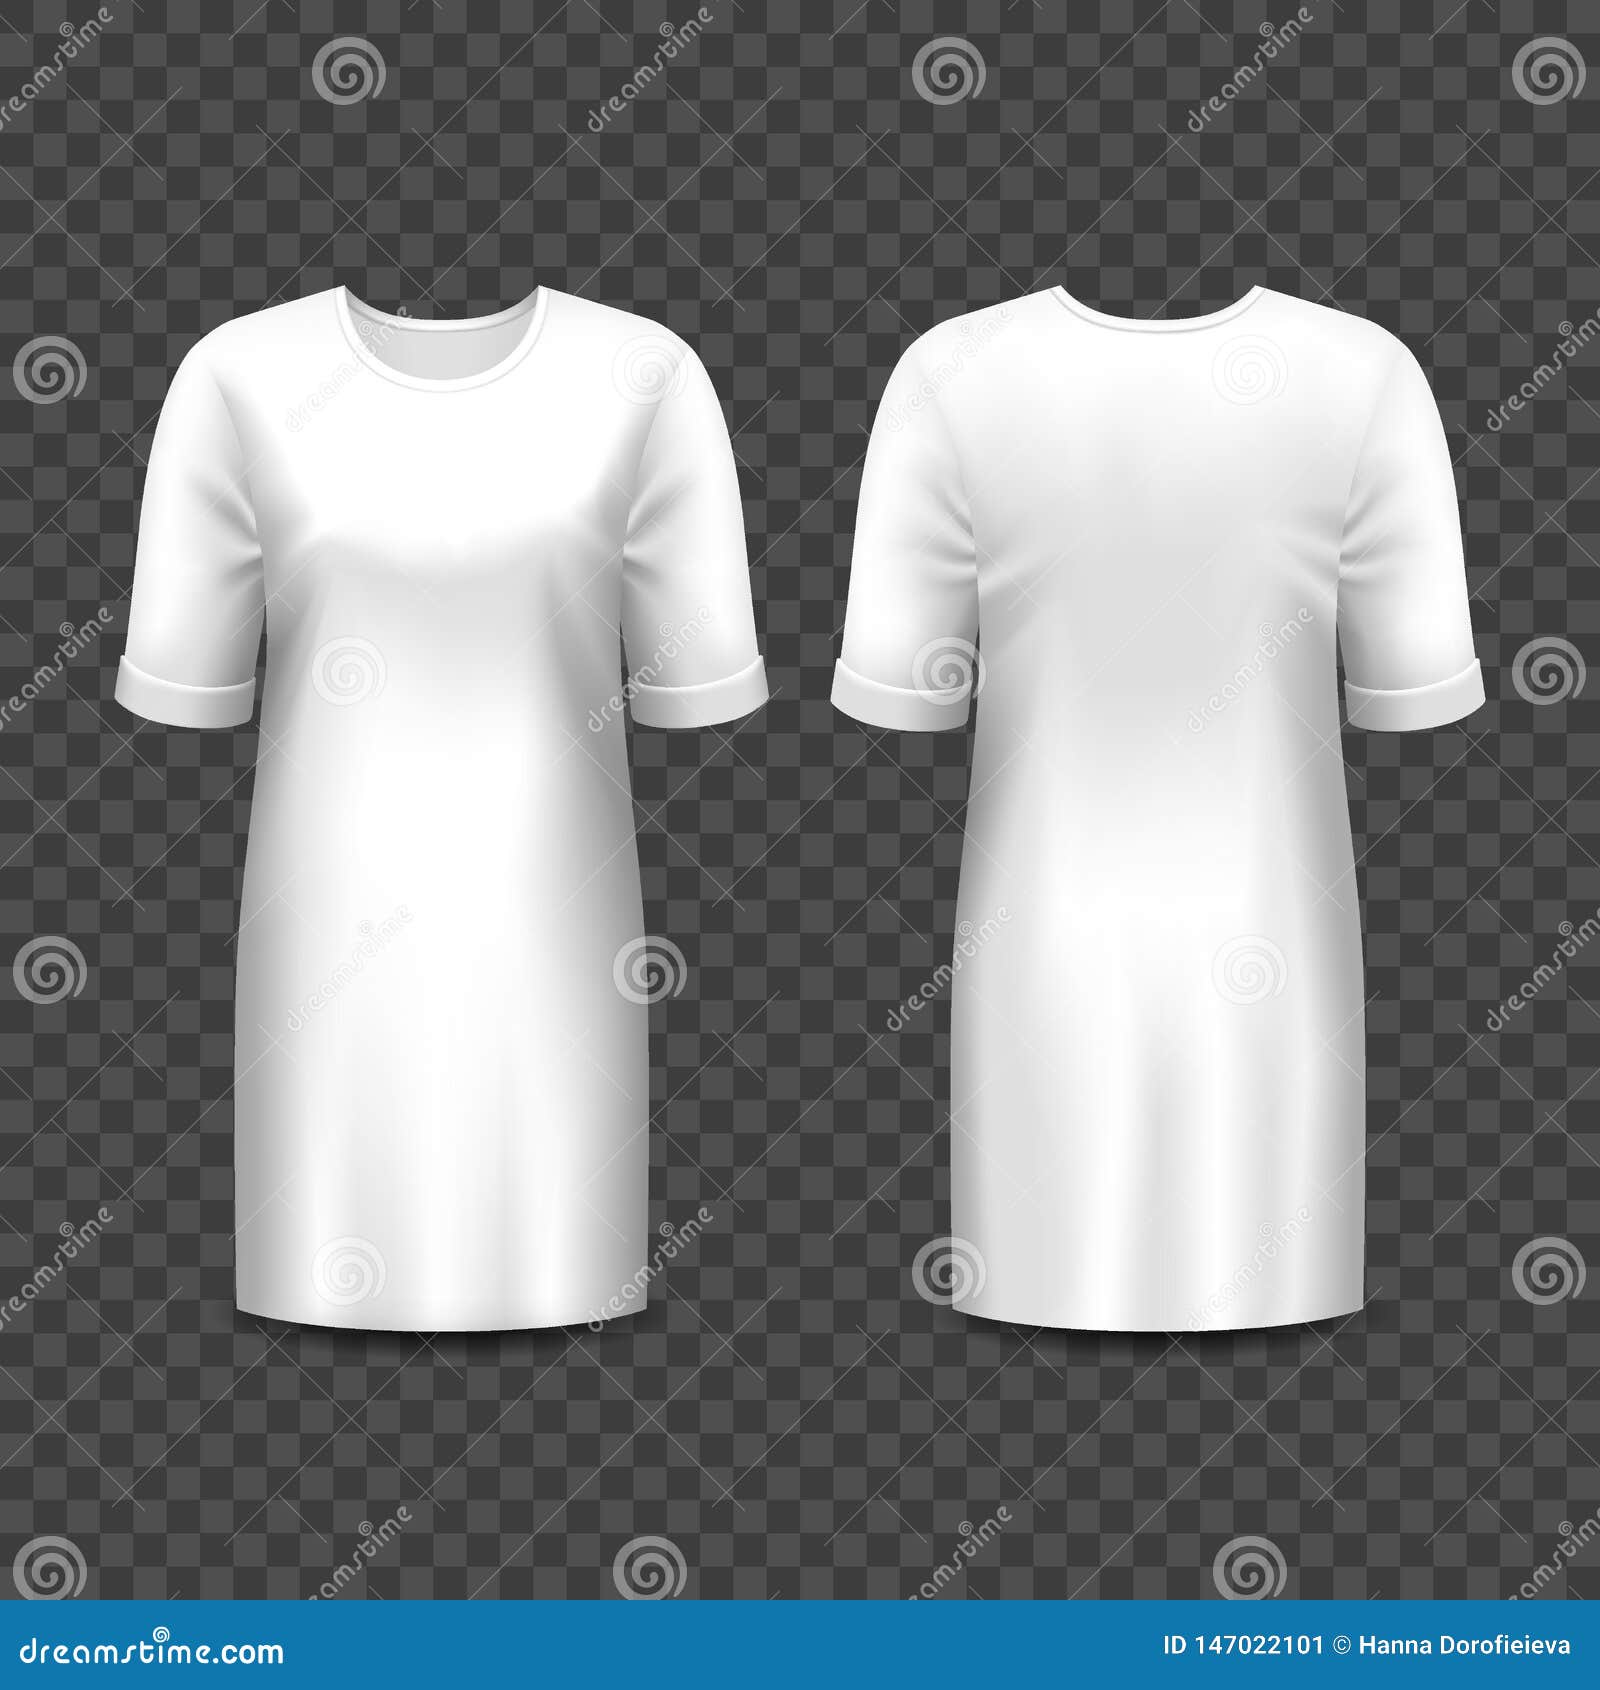 Download Realistic Mockup Of Women Dress Or Gown, Shirt Stock ...